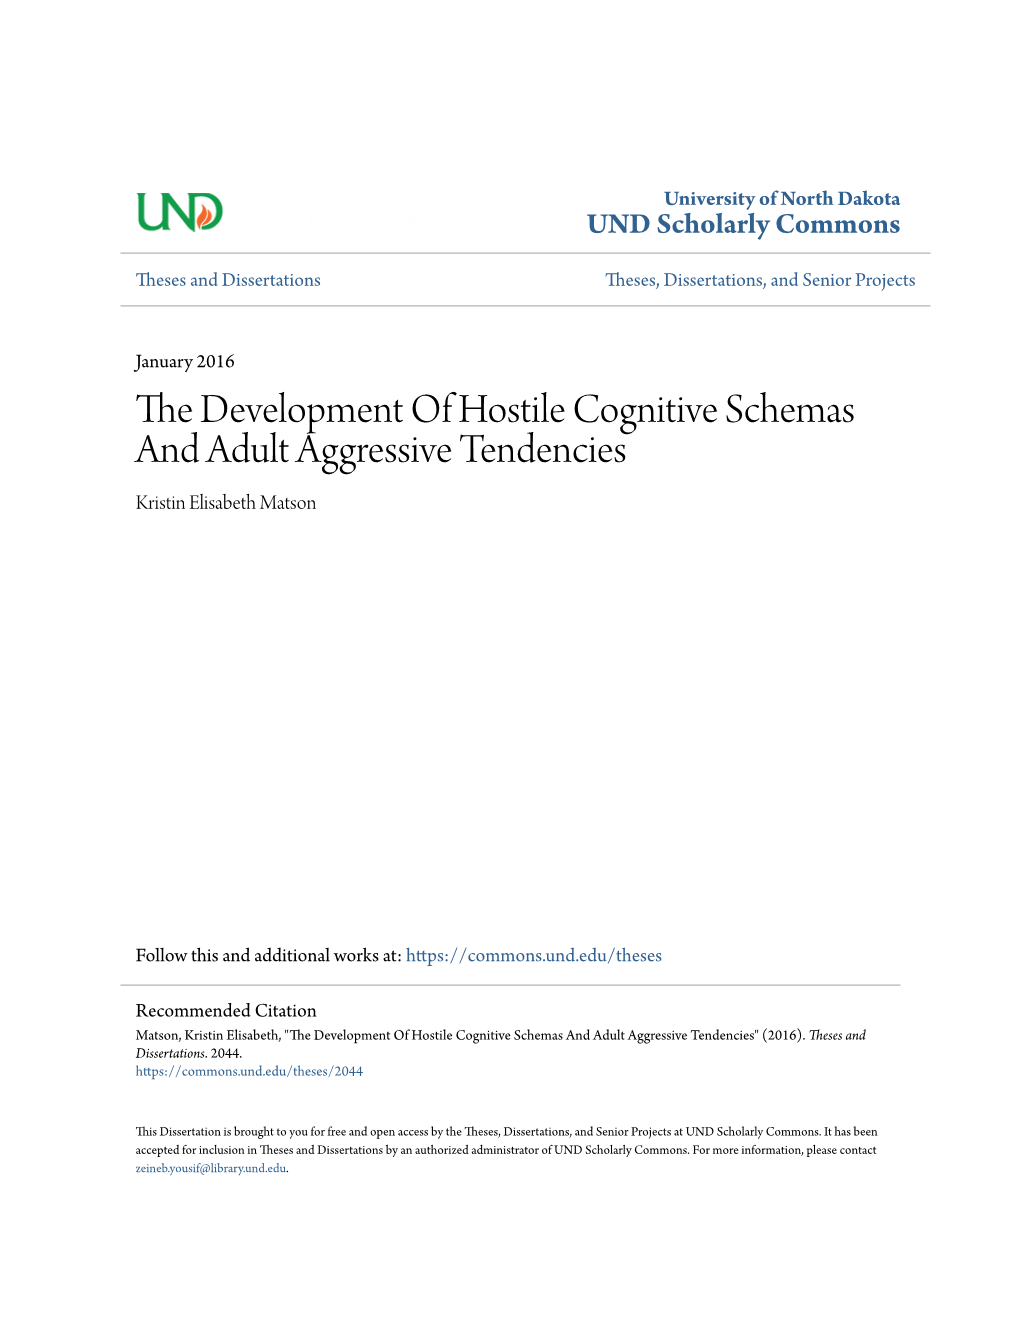 The Development of Hostile Cognitive Schemas and Adult Aggressive Tendencies